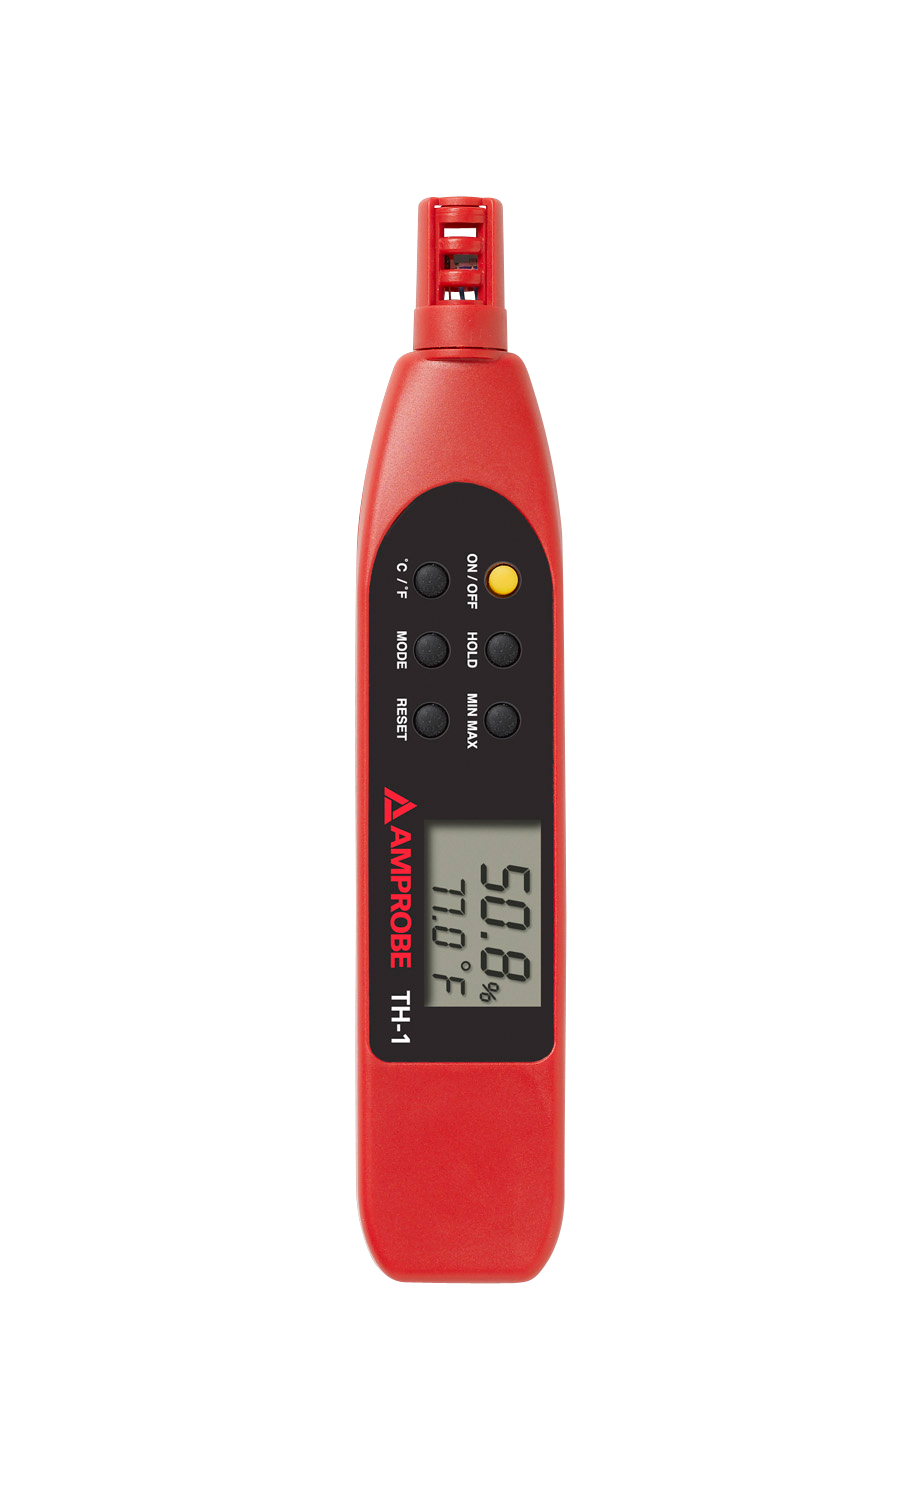 This Amprobe Relative Humidity and Temperature Meter uses a precision capacitance sensor to deliver accurate performance with long term stability. This high accuracy instrument measures the full range of relative humidity from 0 percent to 100 percent and features an exceptionally wide ambient temperature measurement range from -20 °C (-4 °F) to 60 °C (140 °F). The sensor is mounted on along shaft extending from the top surface of the unit, making probing into duct work and hard to reach areas more easy. The large LCD displays two measurements simultaneously with a full range of display options including hold, min, max, and relative. The TH-3 is a complete package and comes with soft carrying case, sensor cover, battery and manual.